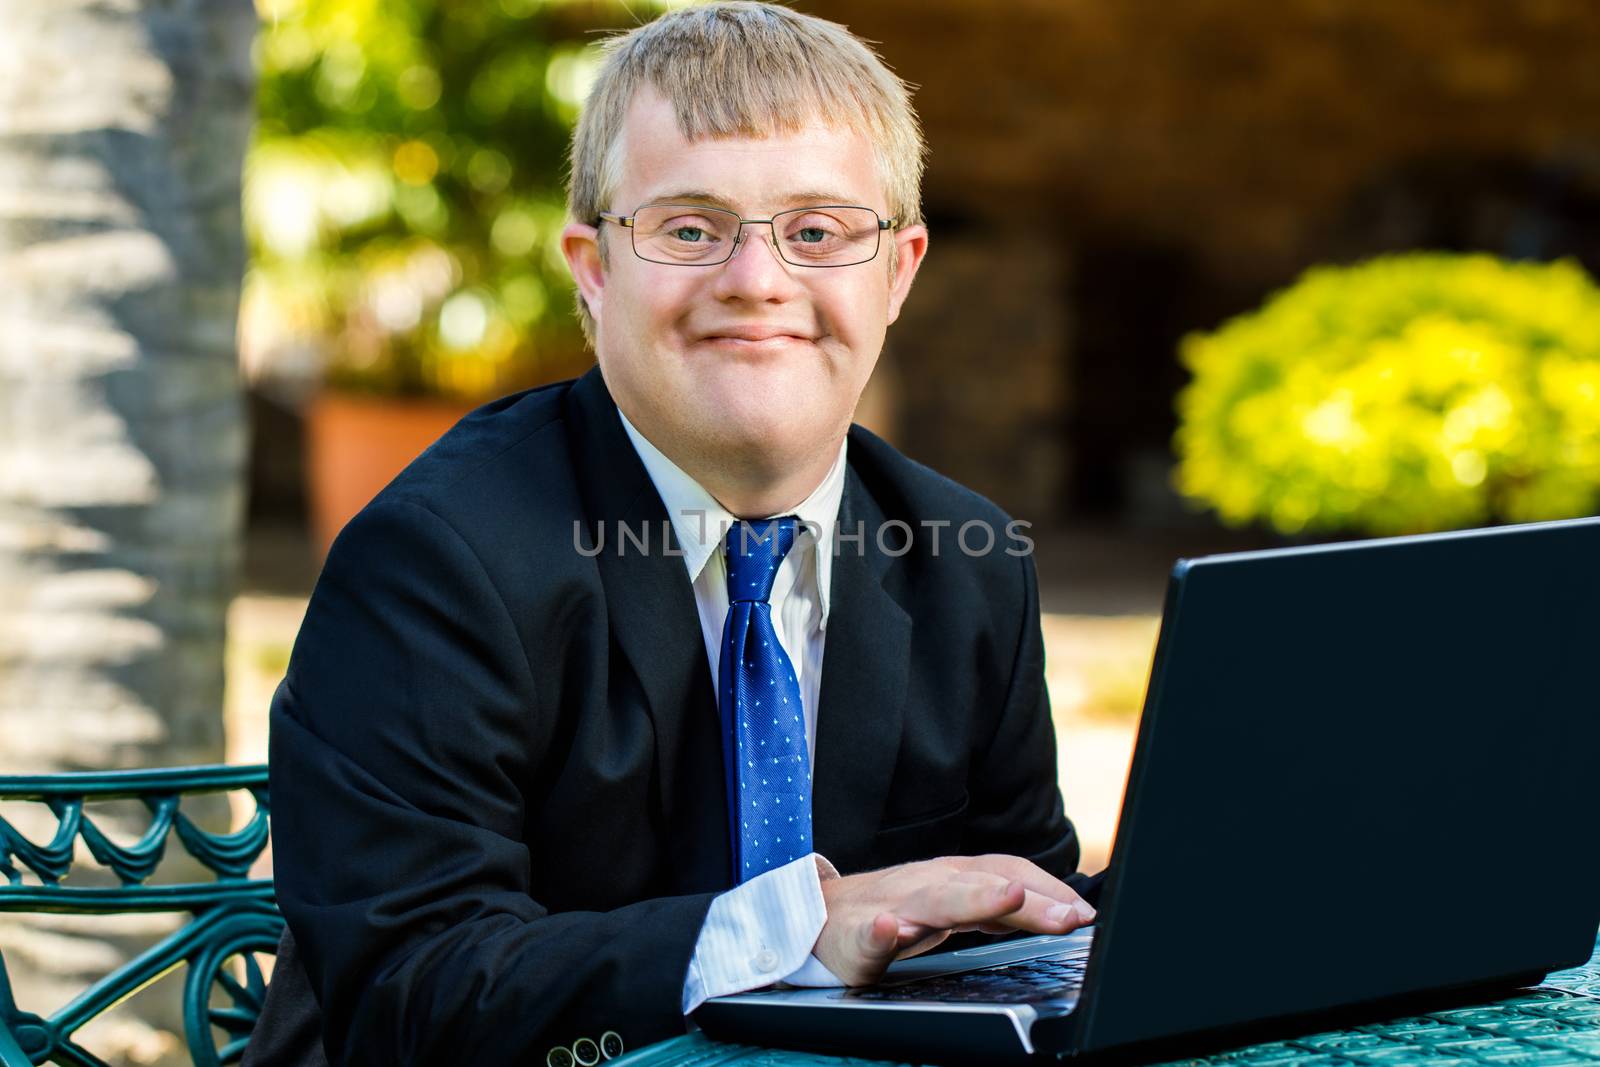 Close up portrait of young businessman with down syndrome doing accounting on laptop outdoors.